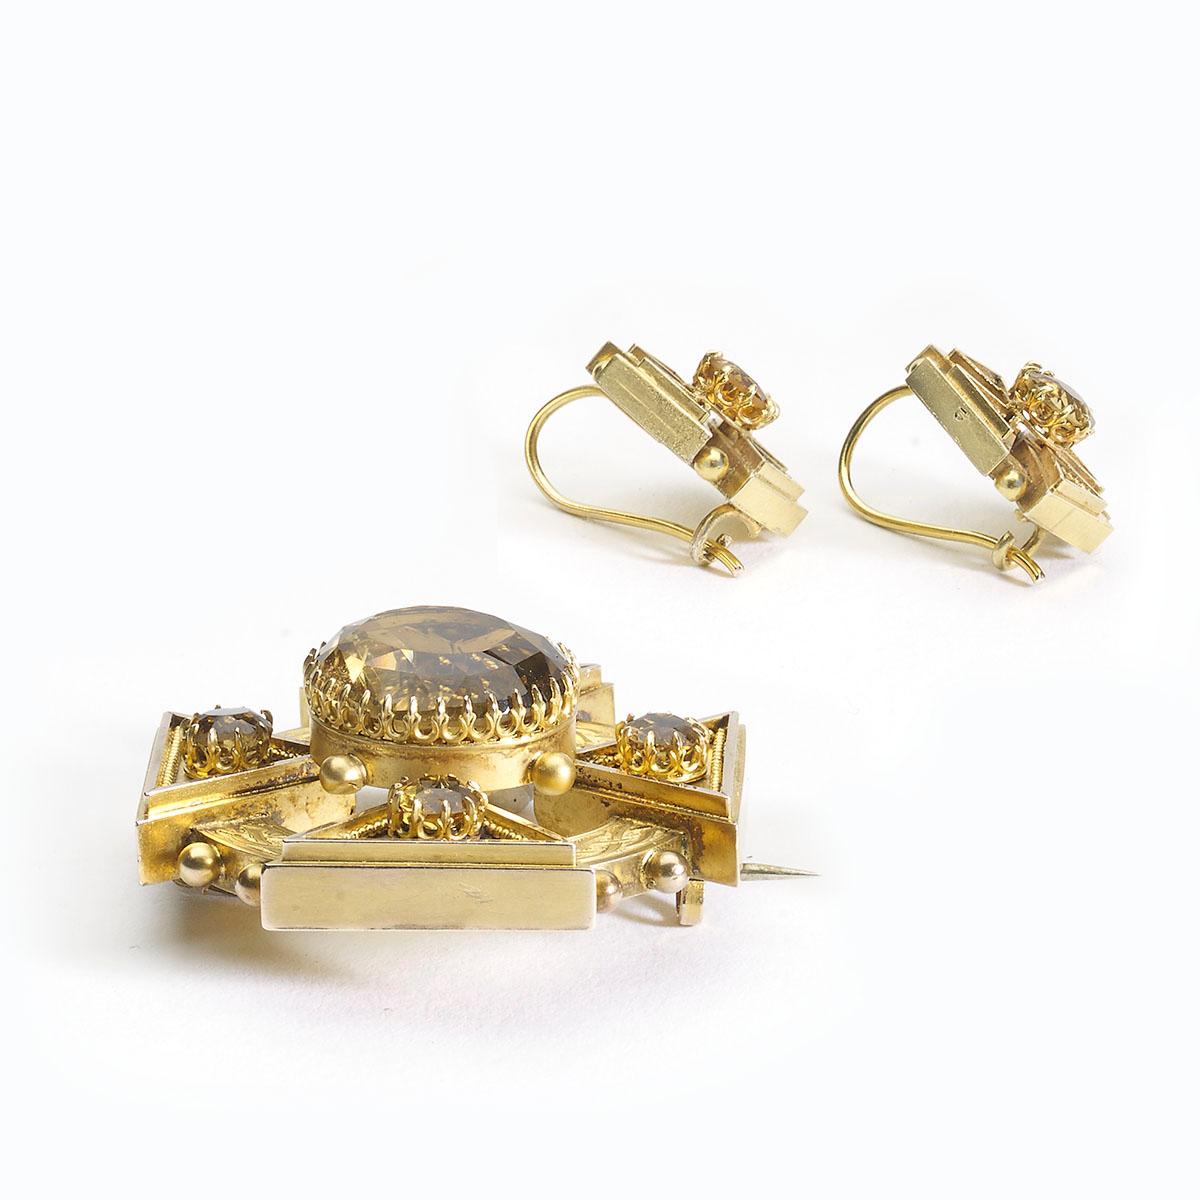 An antique citrine and gold Maltese Cross brooch and earrings suite, set with circular citrines in the centre, with decorative claw settings, with citrine set triangles, with granulation decorating the edges, forming the cross, superimposed on a